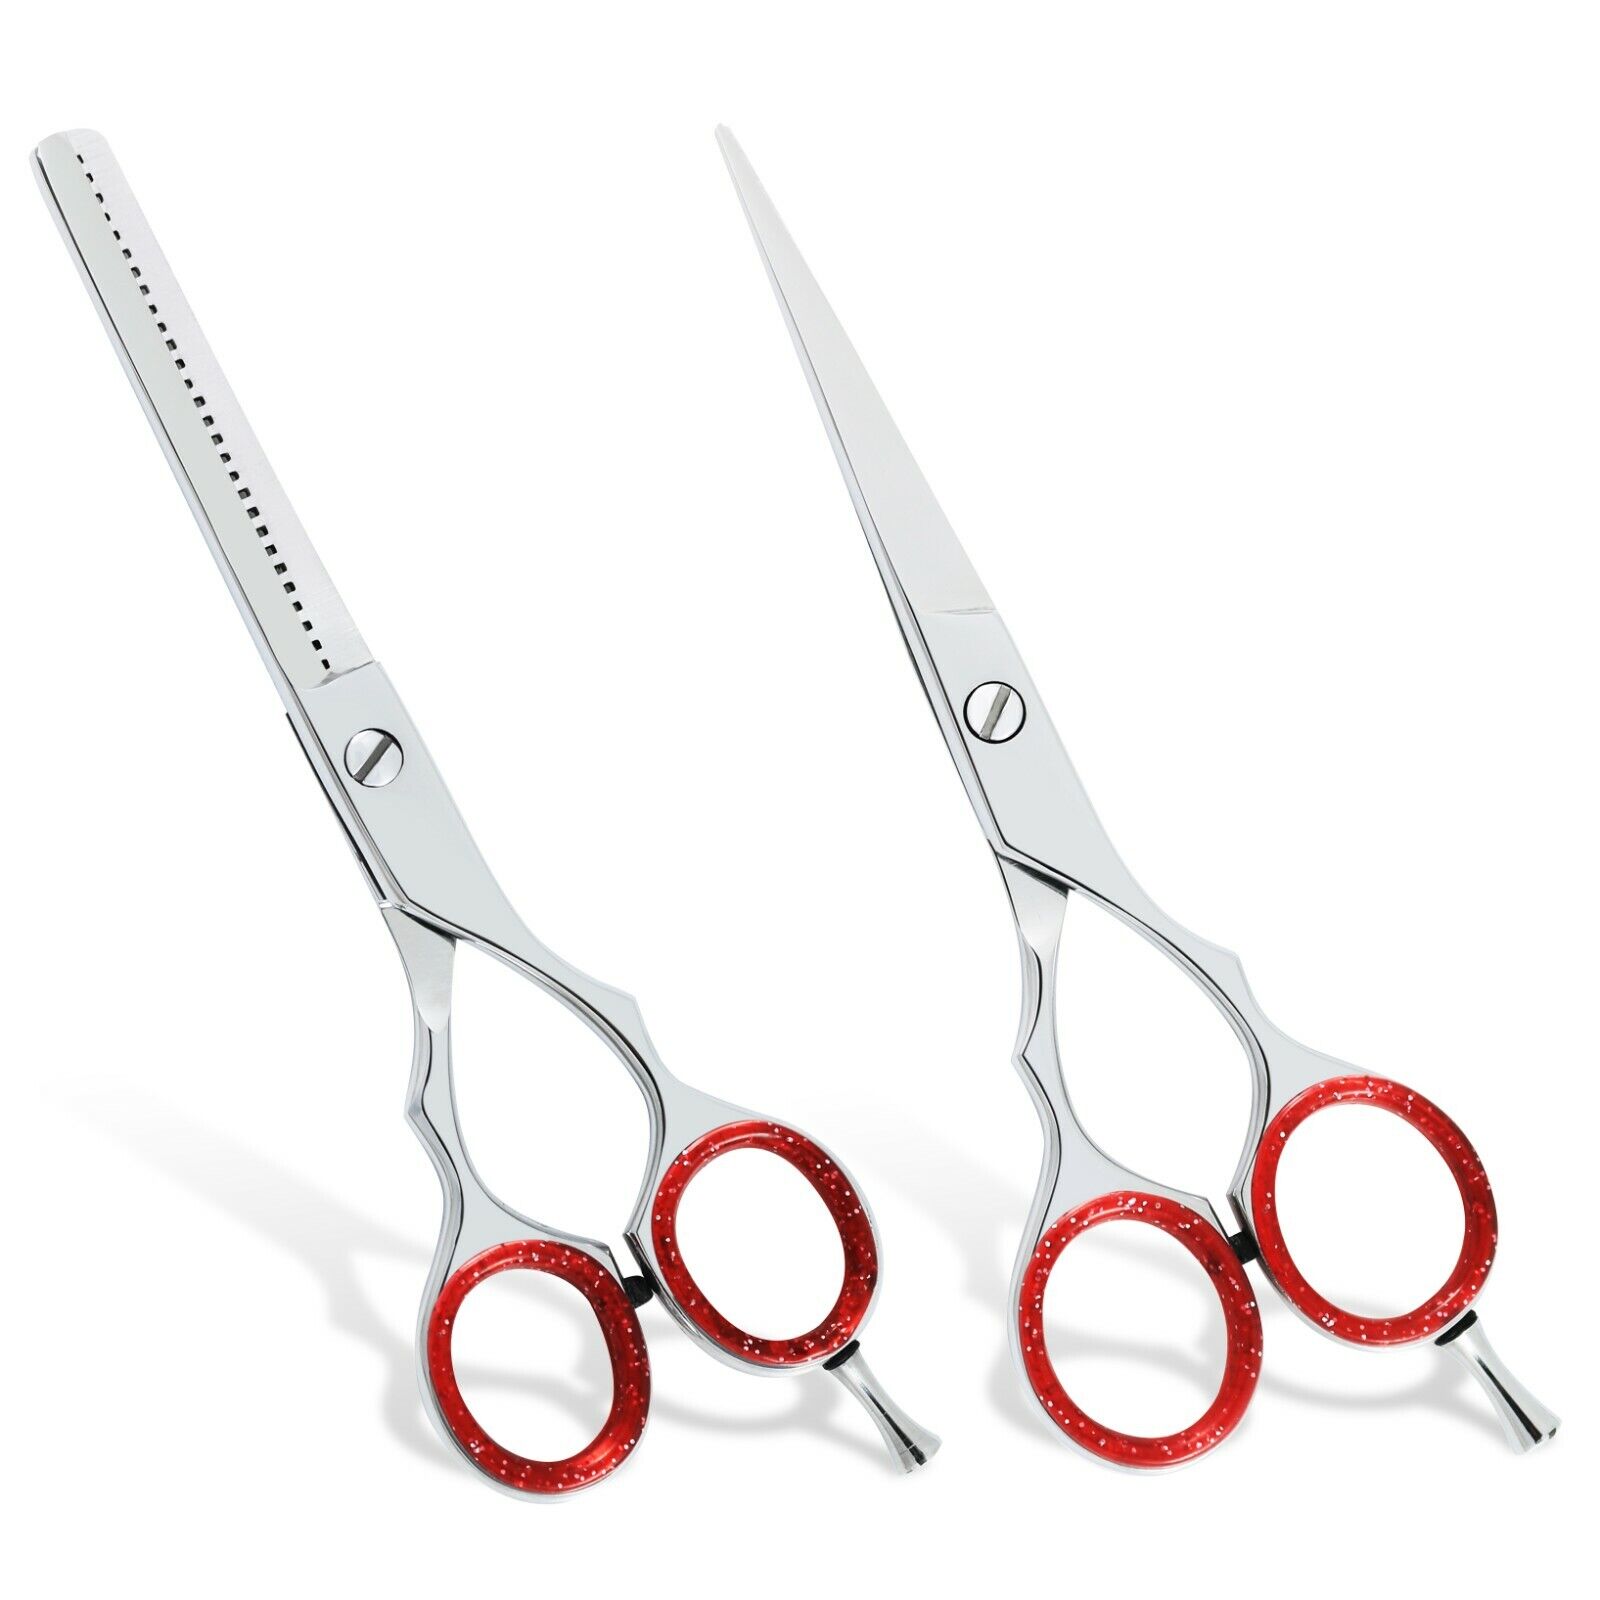 PROFESSIONAL BARBER HAIR CUTTING+THINNING SCISSORS BARBER SHEARS SET 6.5"  vertical int Does Not Apply